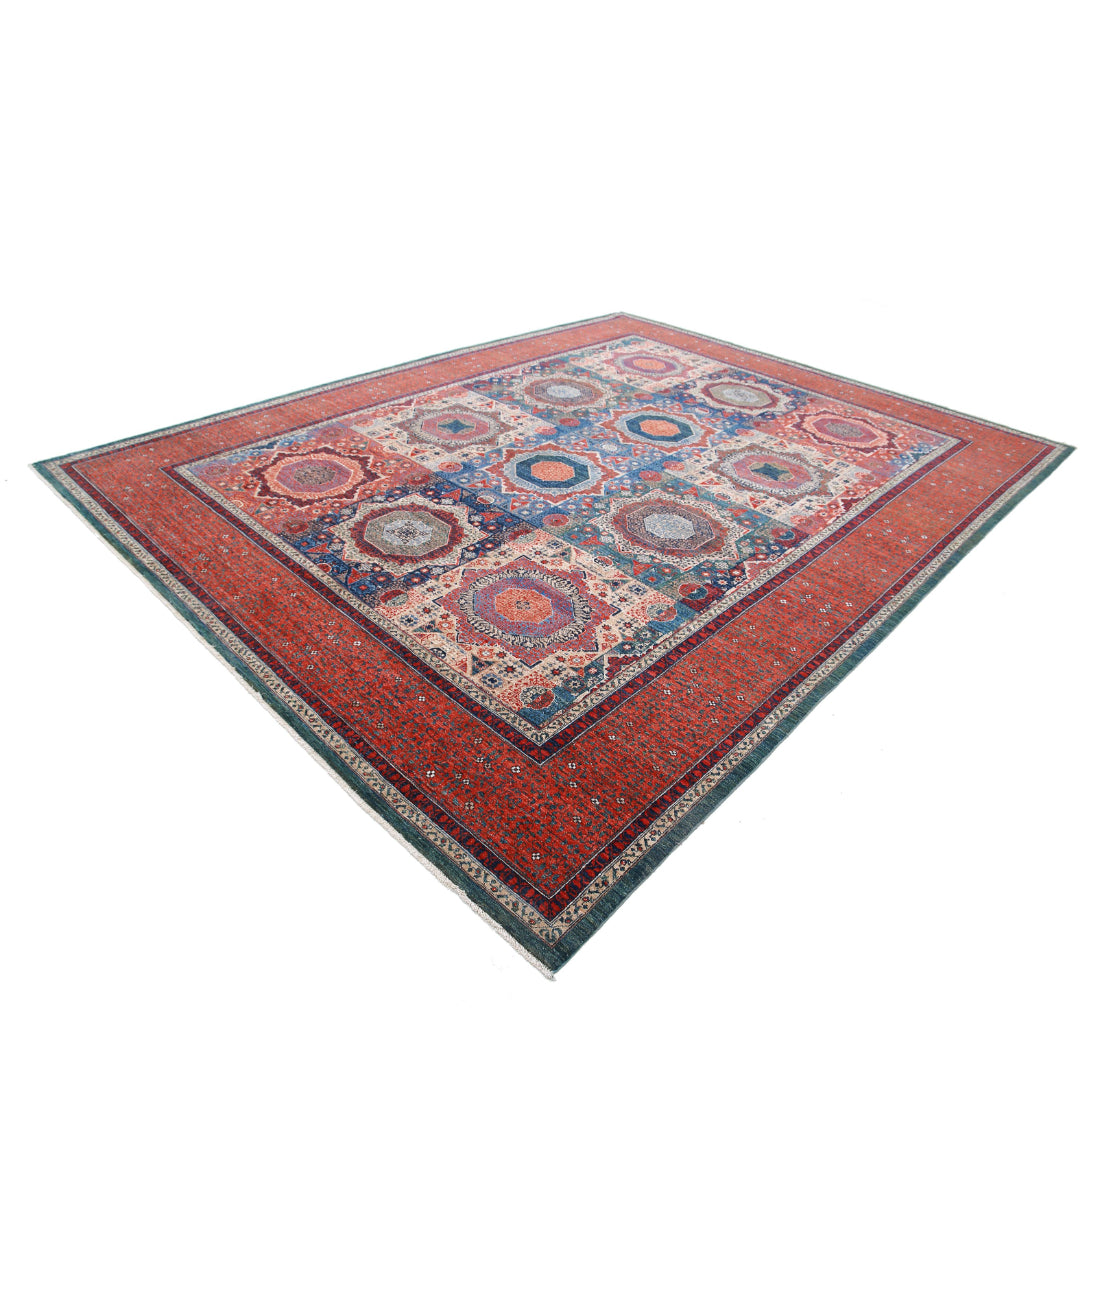 Mamluk 10'2'' X 13'0'' Hand-Knotted Wool Rug 10'2'' x 13'0'' (305 X 390) / Green / Red